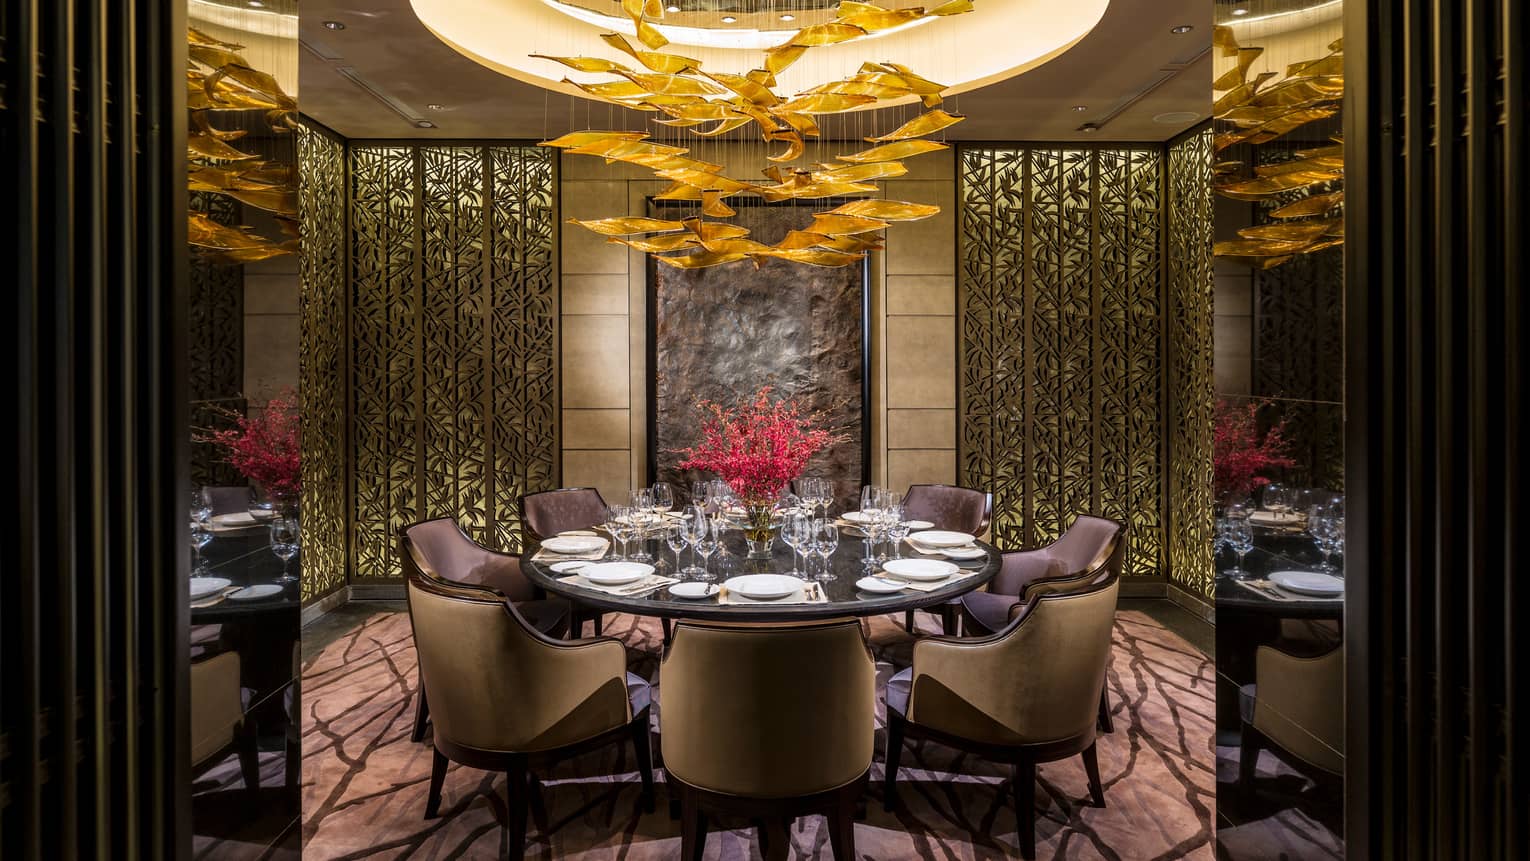 Foo restaurant round dining table in private alcove with decorative gold screens, modern chandelier 